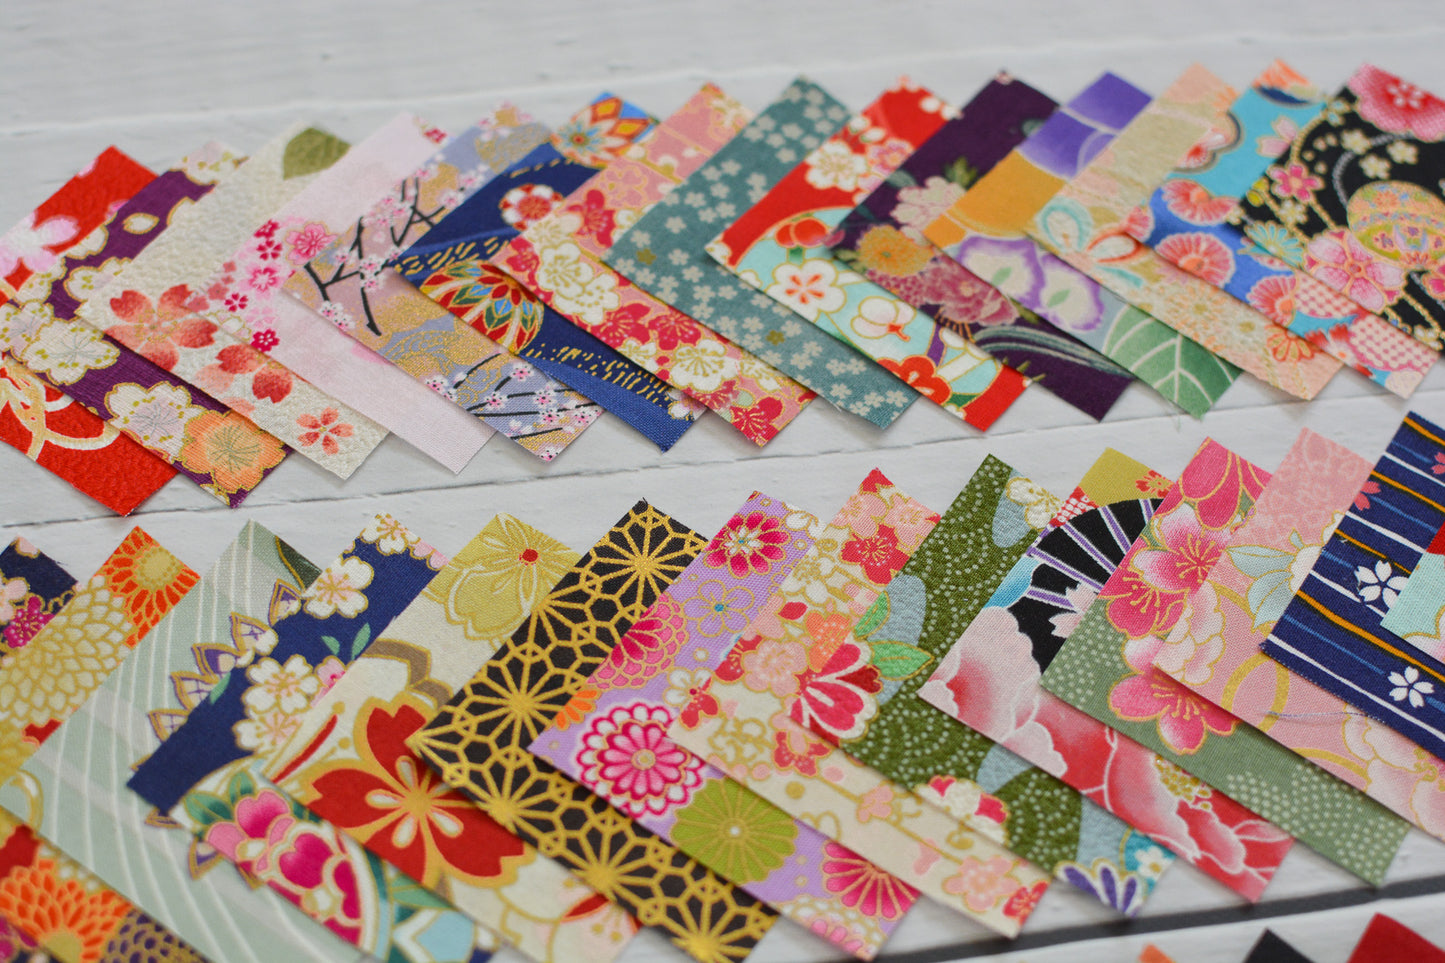 Japanese Fabric Mini Charm Pack 3" x 3" squares - 42 pieces assortment of all different prints